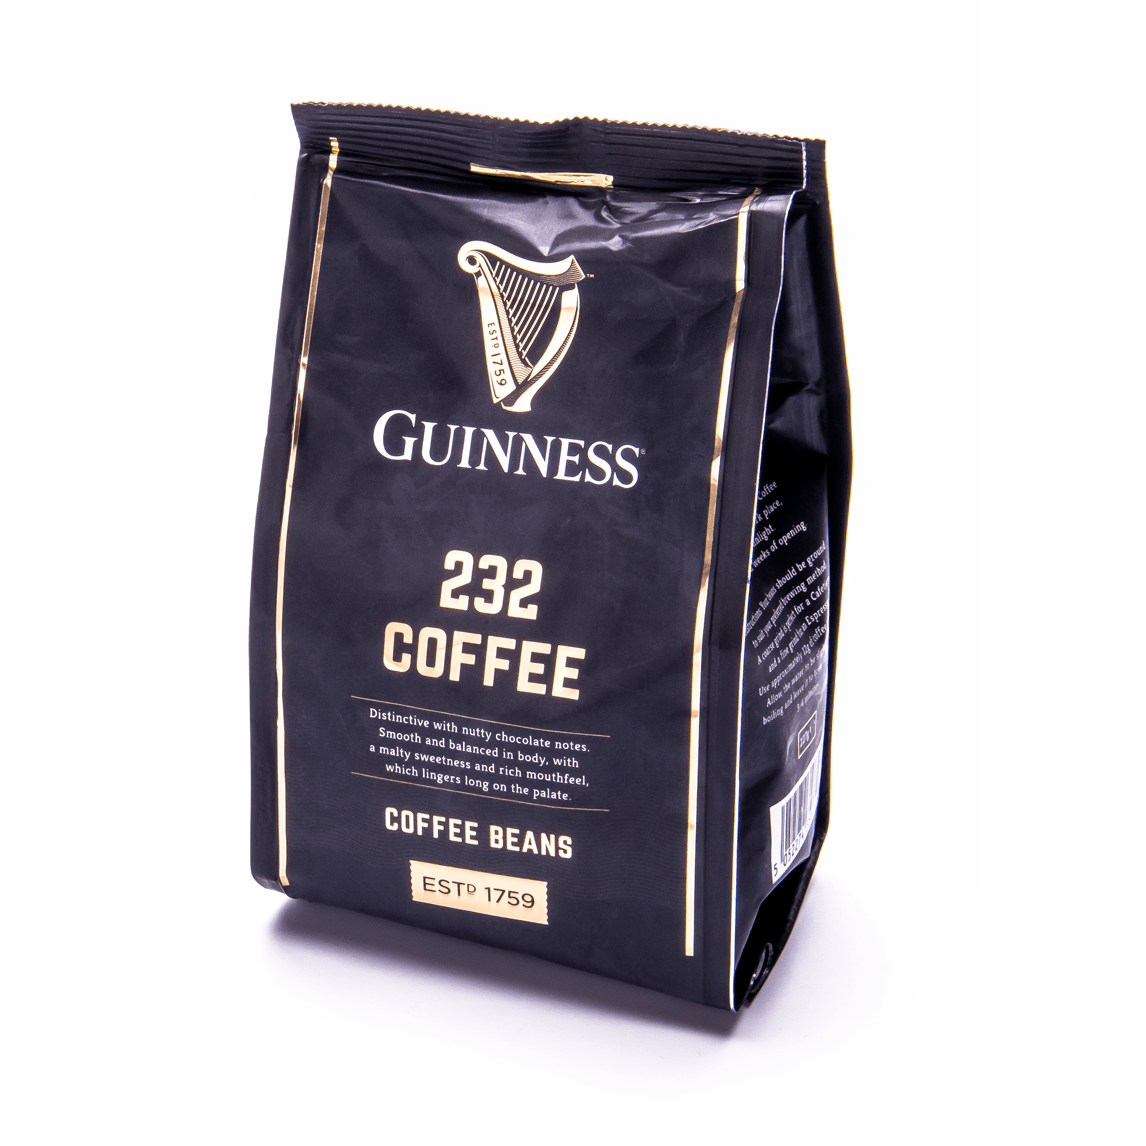 Introducing the Guinness Indulgence Gift Box, a special gift box for Guinness aficionados featuring 22 indulgent coffee beans.